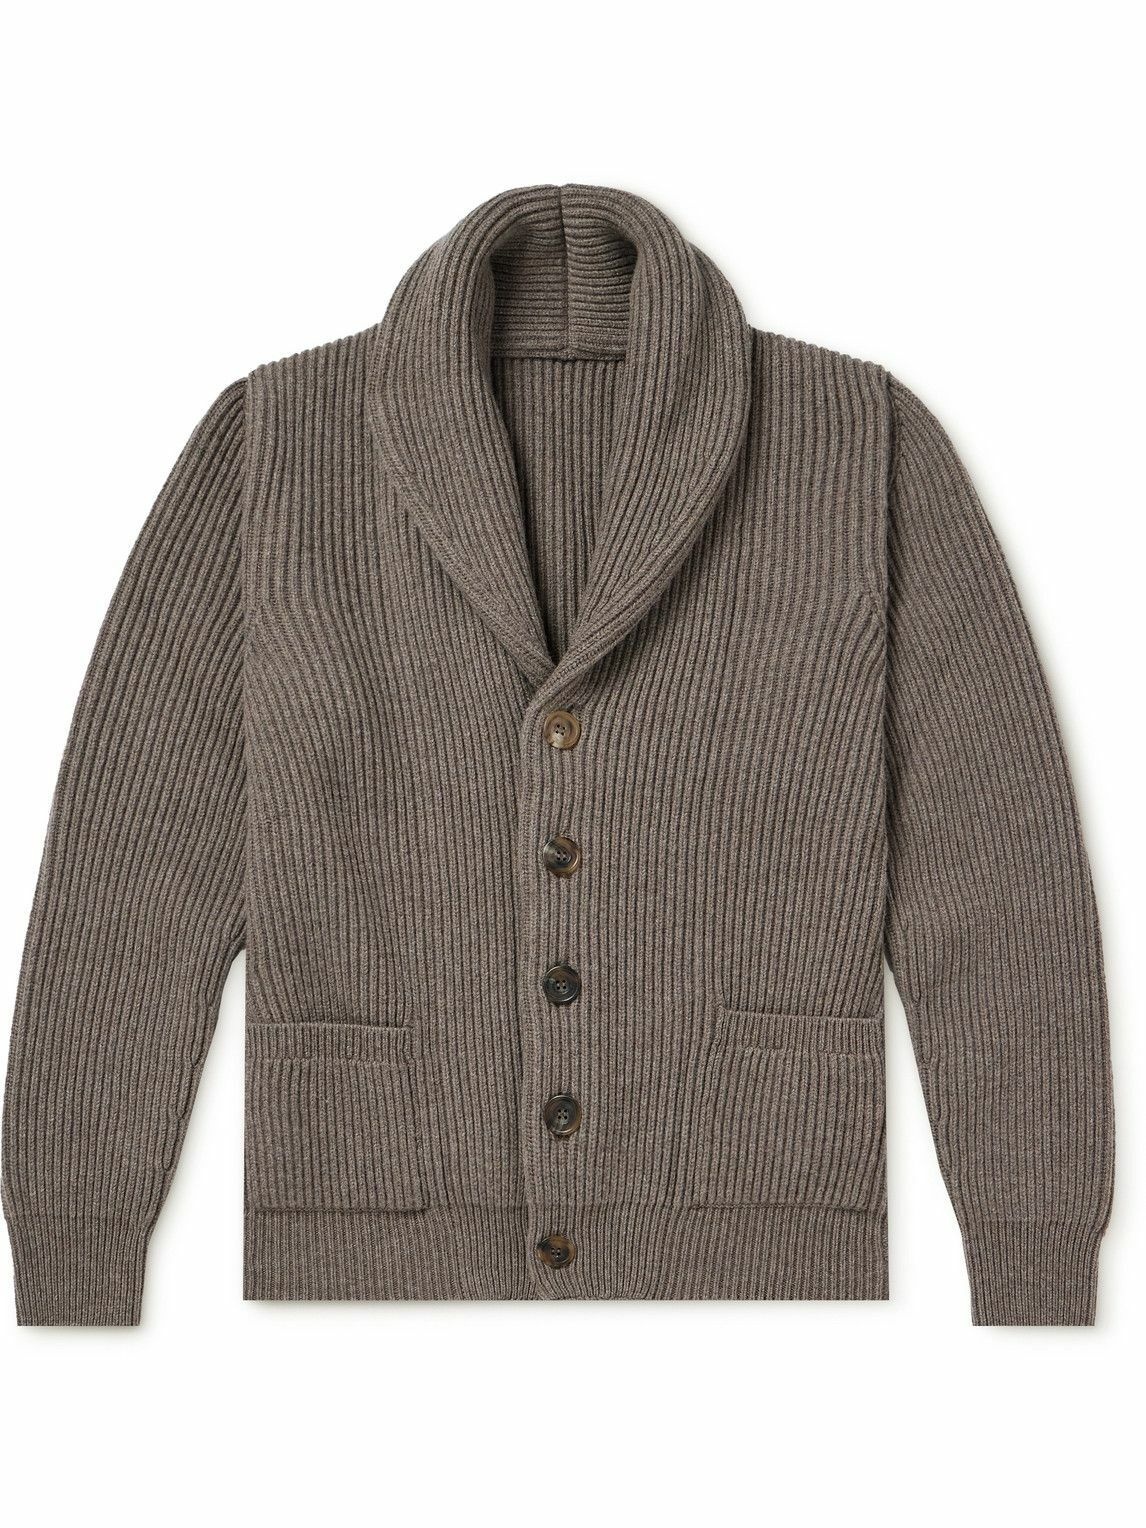 Photo: Anderson & Sheppard - Shawl-Collar Ribbed Wool and Cashmere-Blend Cardigan - Neutrals